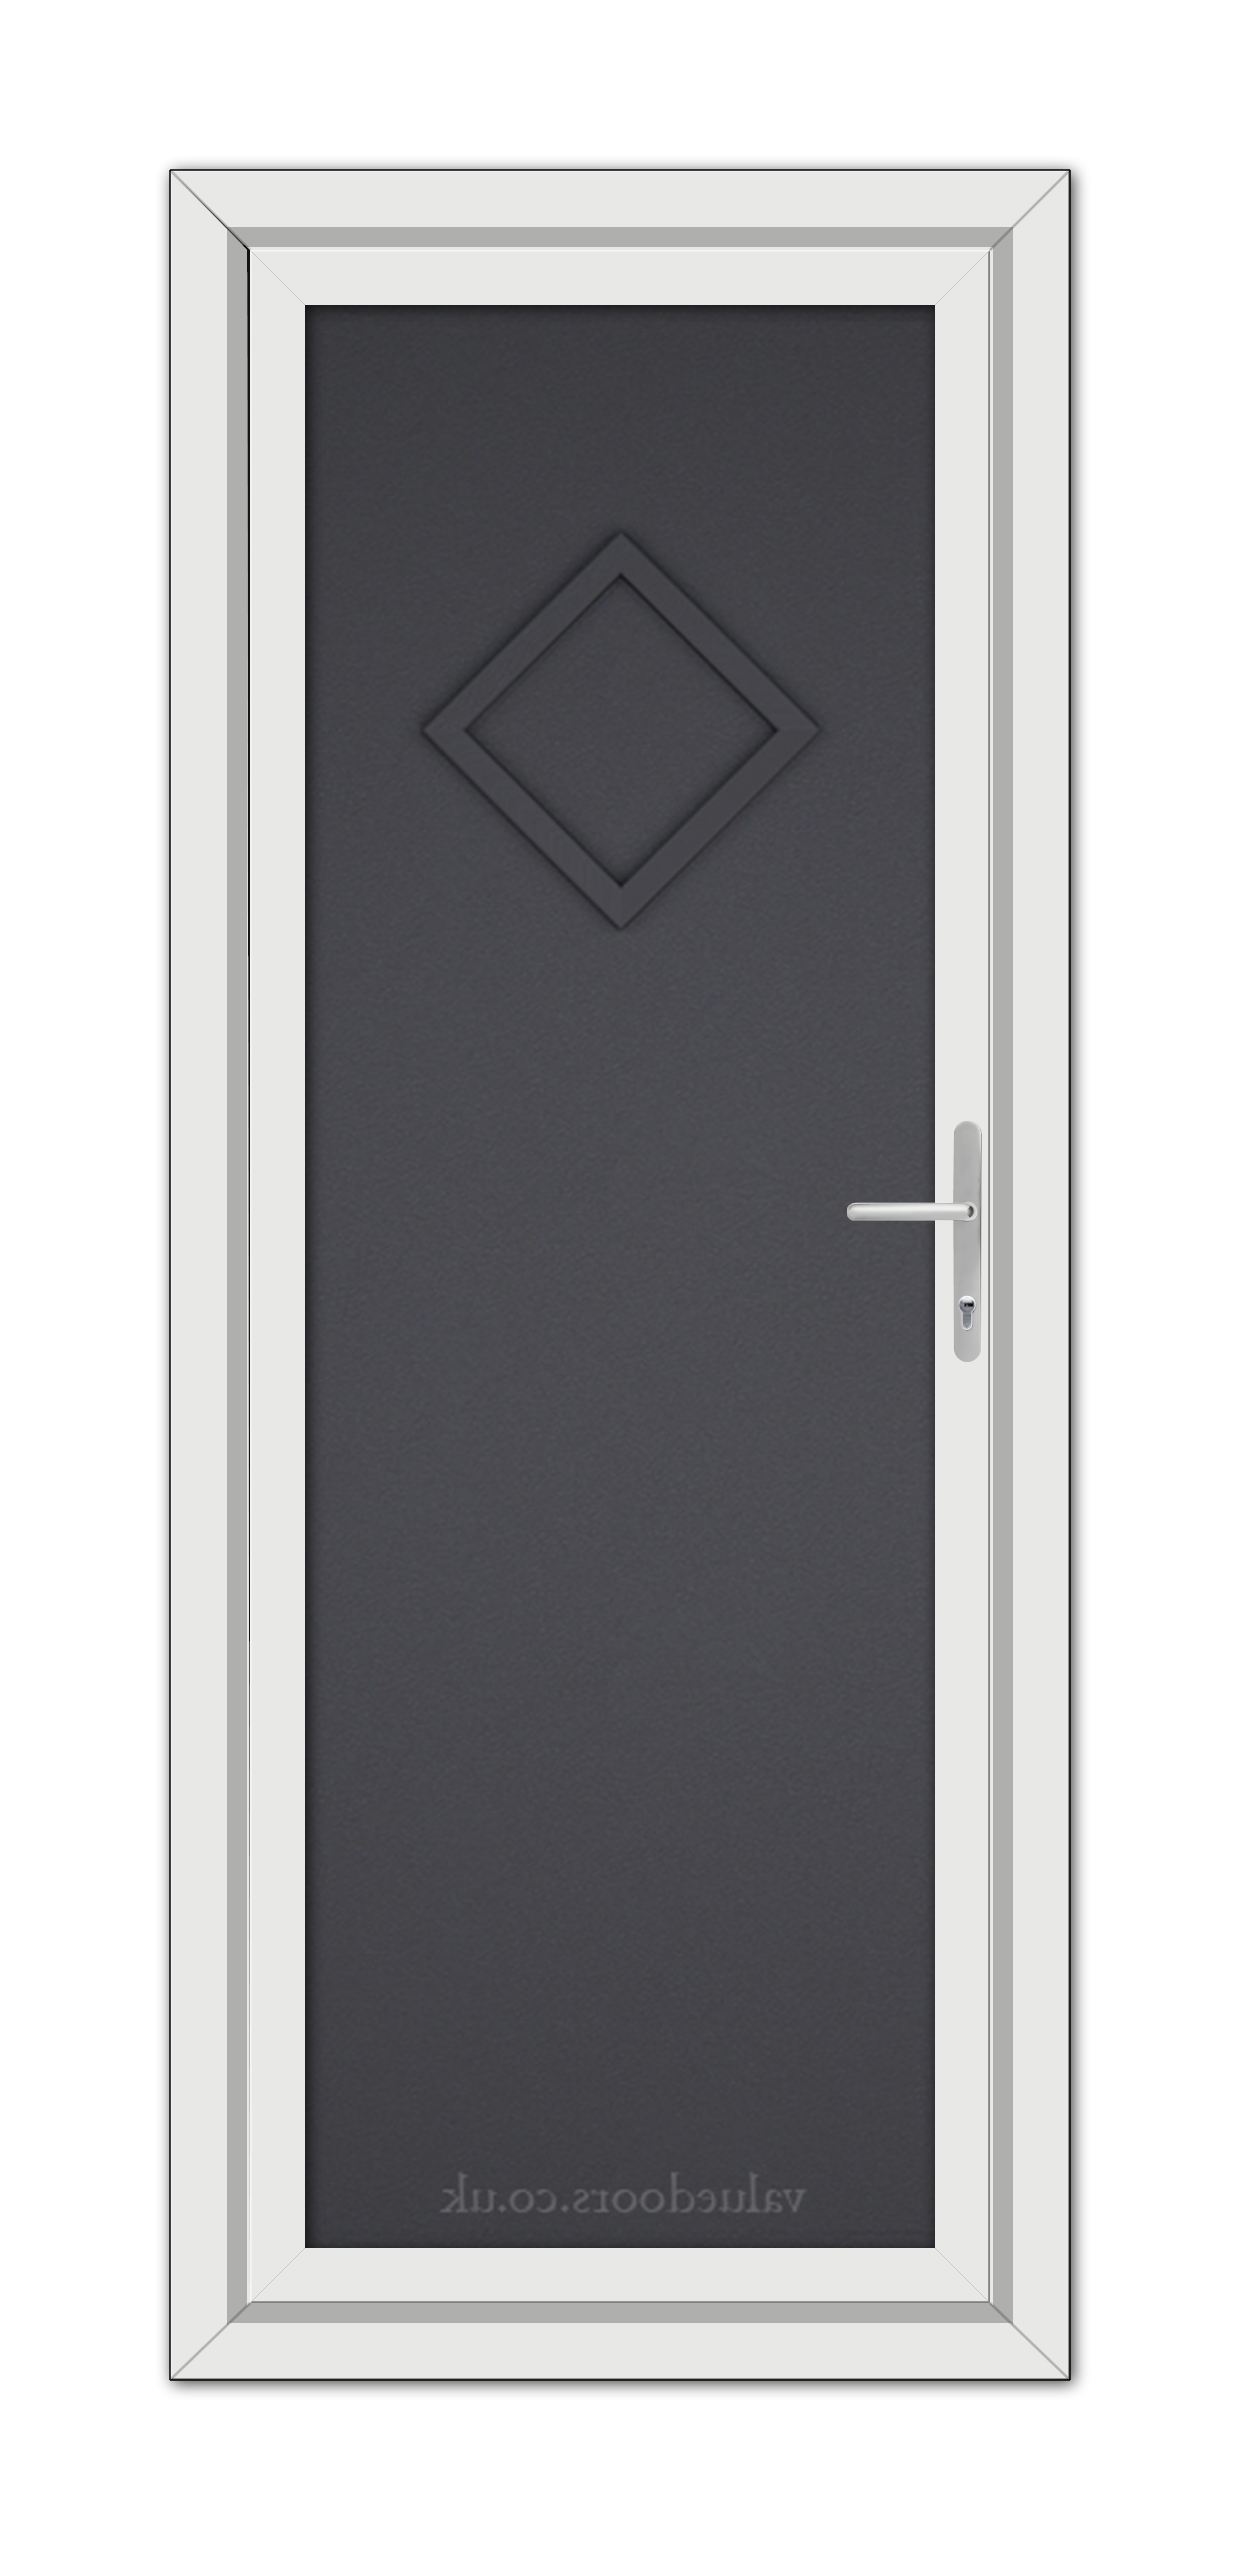 A Grey Grained Modern 5131 Solid uPVC Door with a diamond-shaped panel, framed in white, featuring a silver handle on the right side.